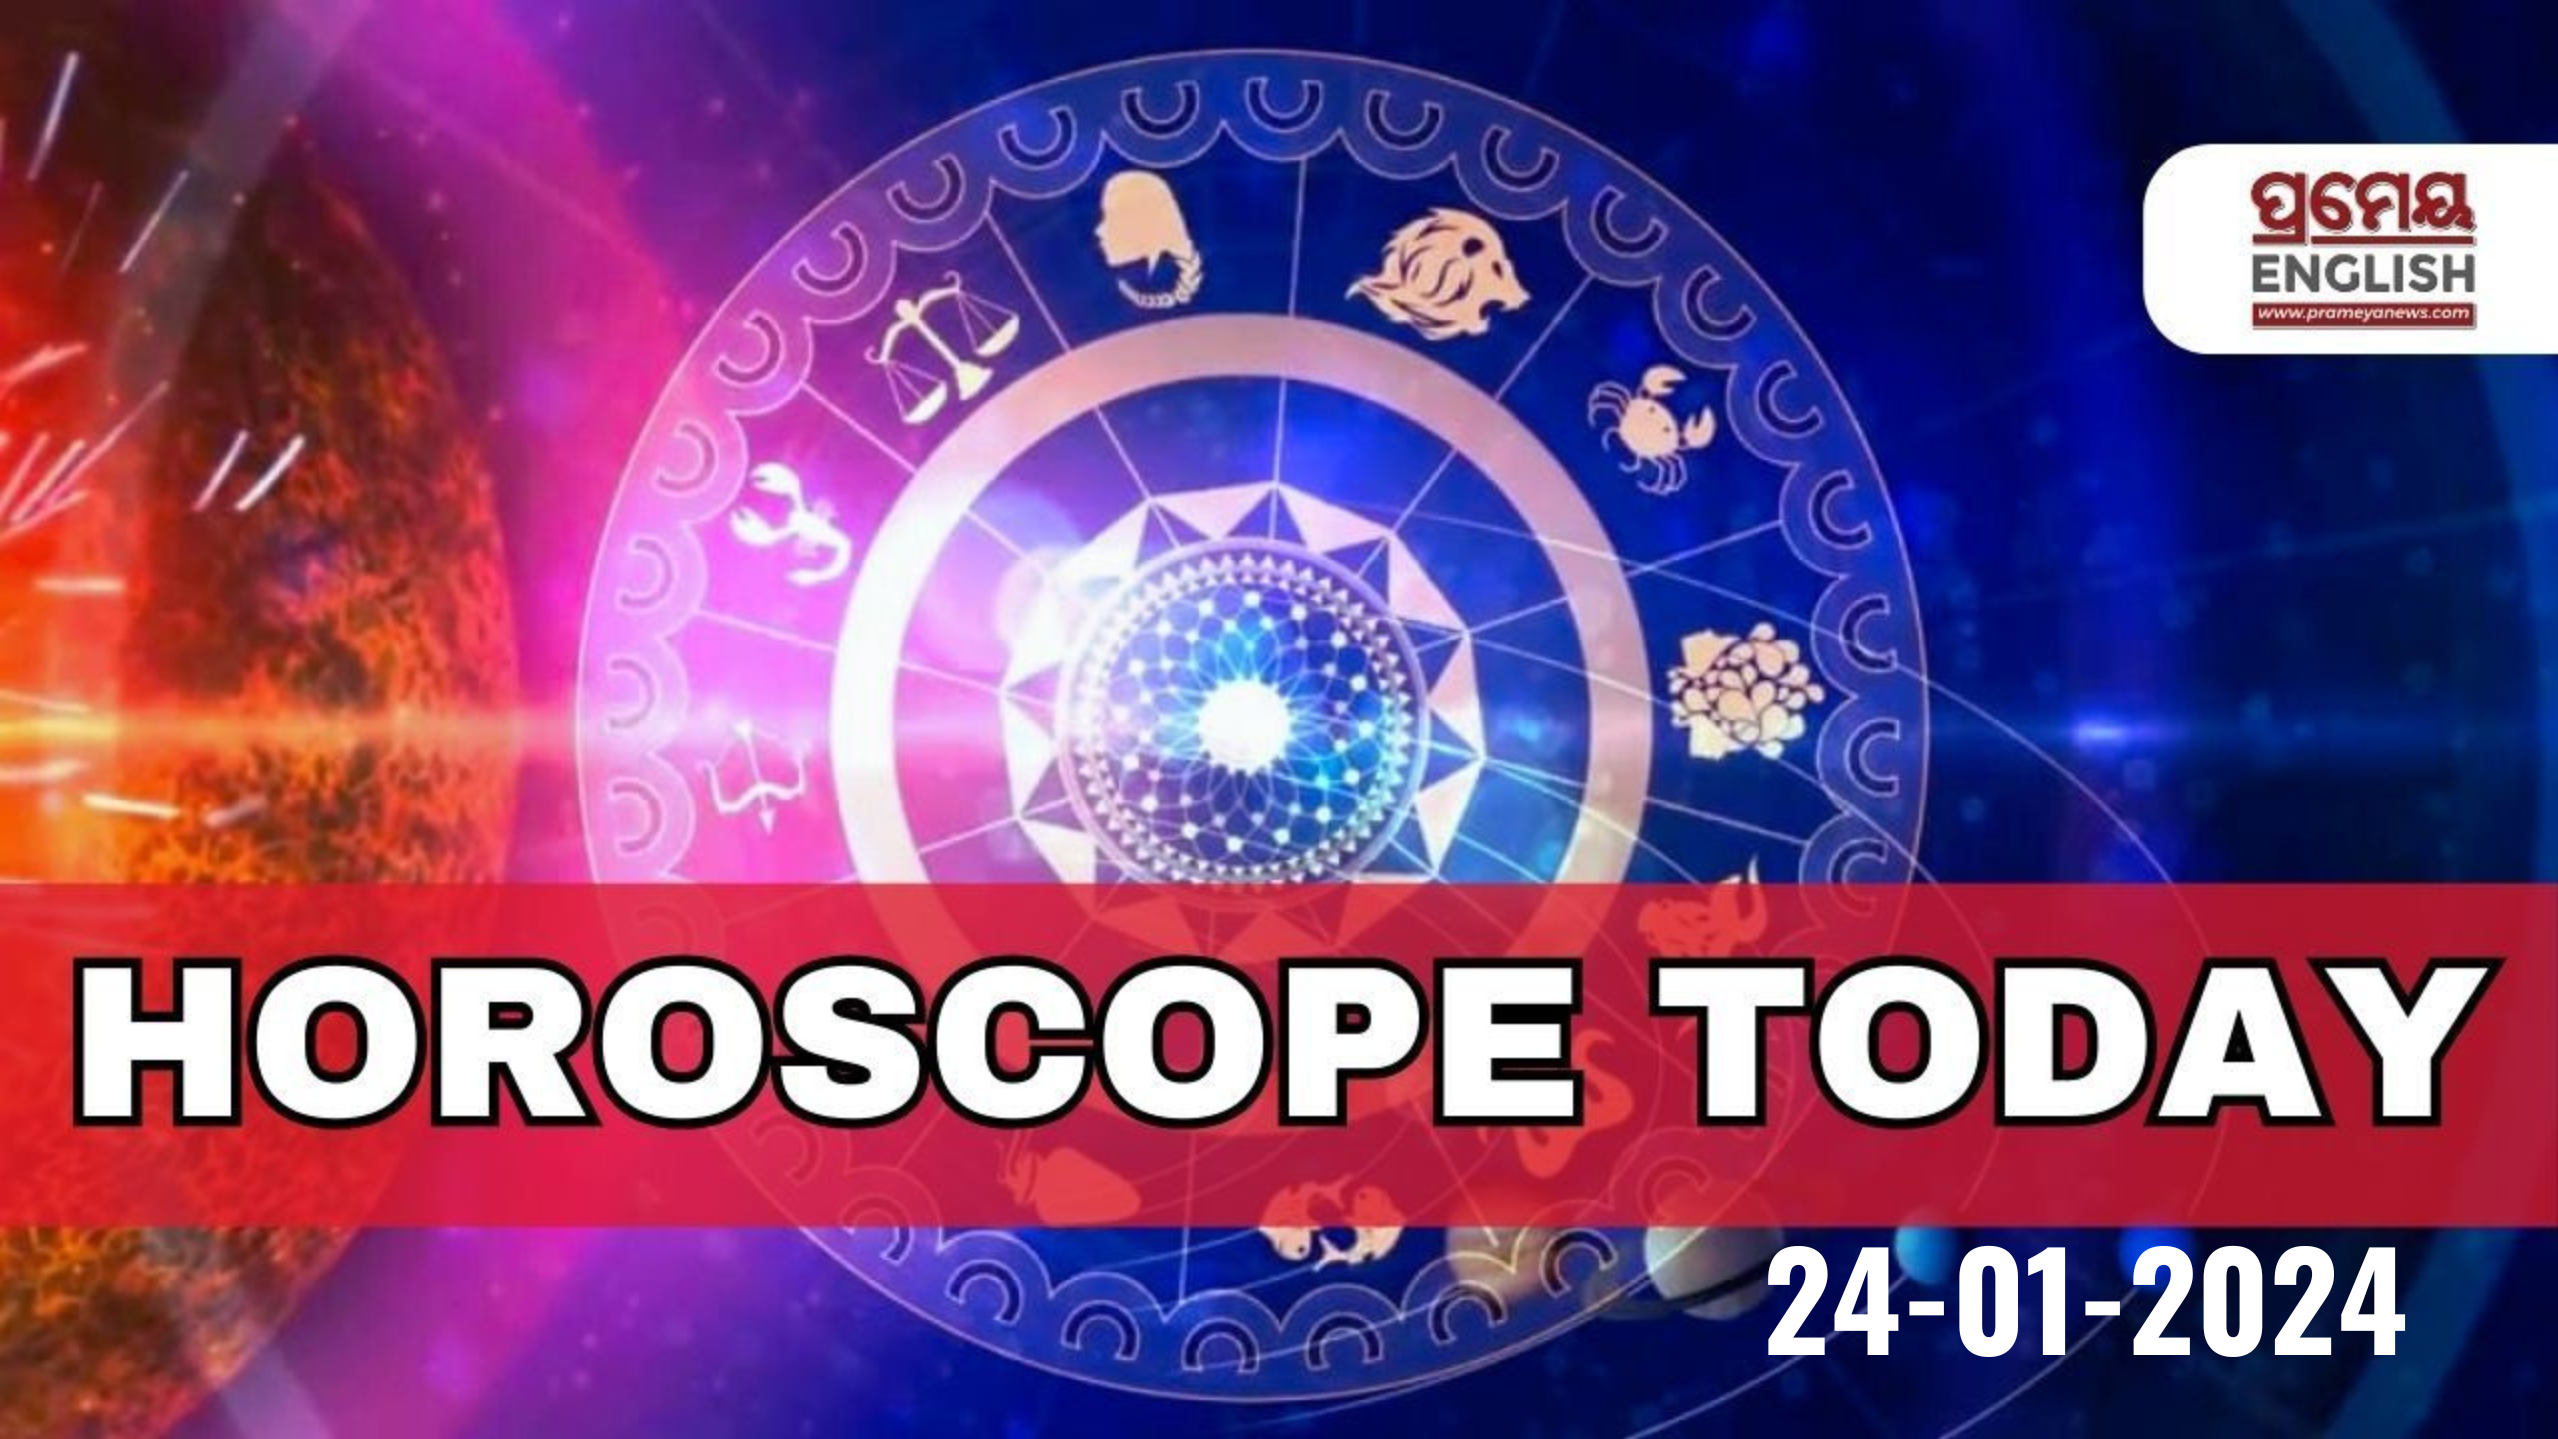 Horoscope Today: Astrological prediction for January 24, 2024